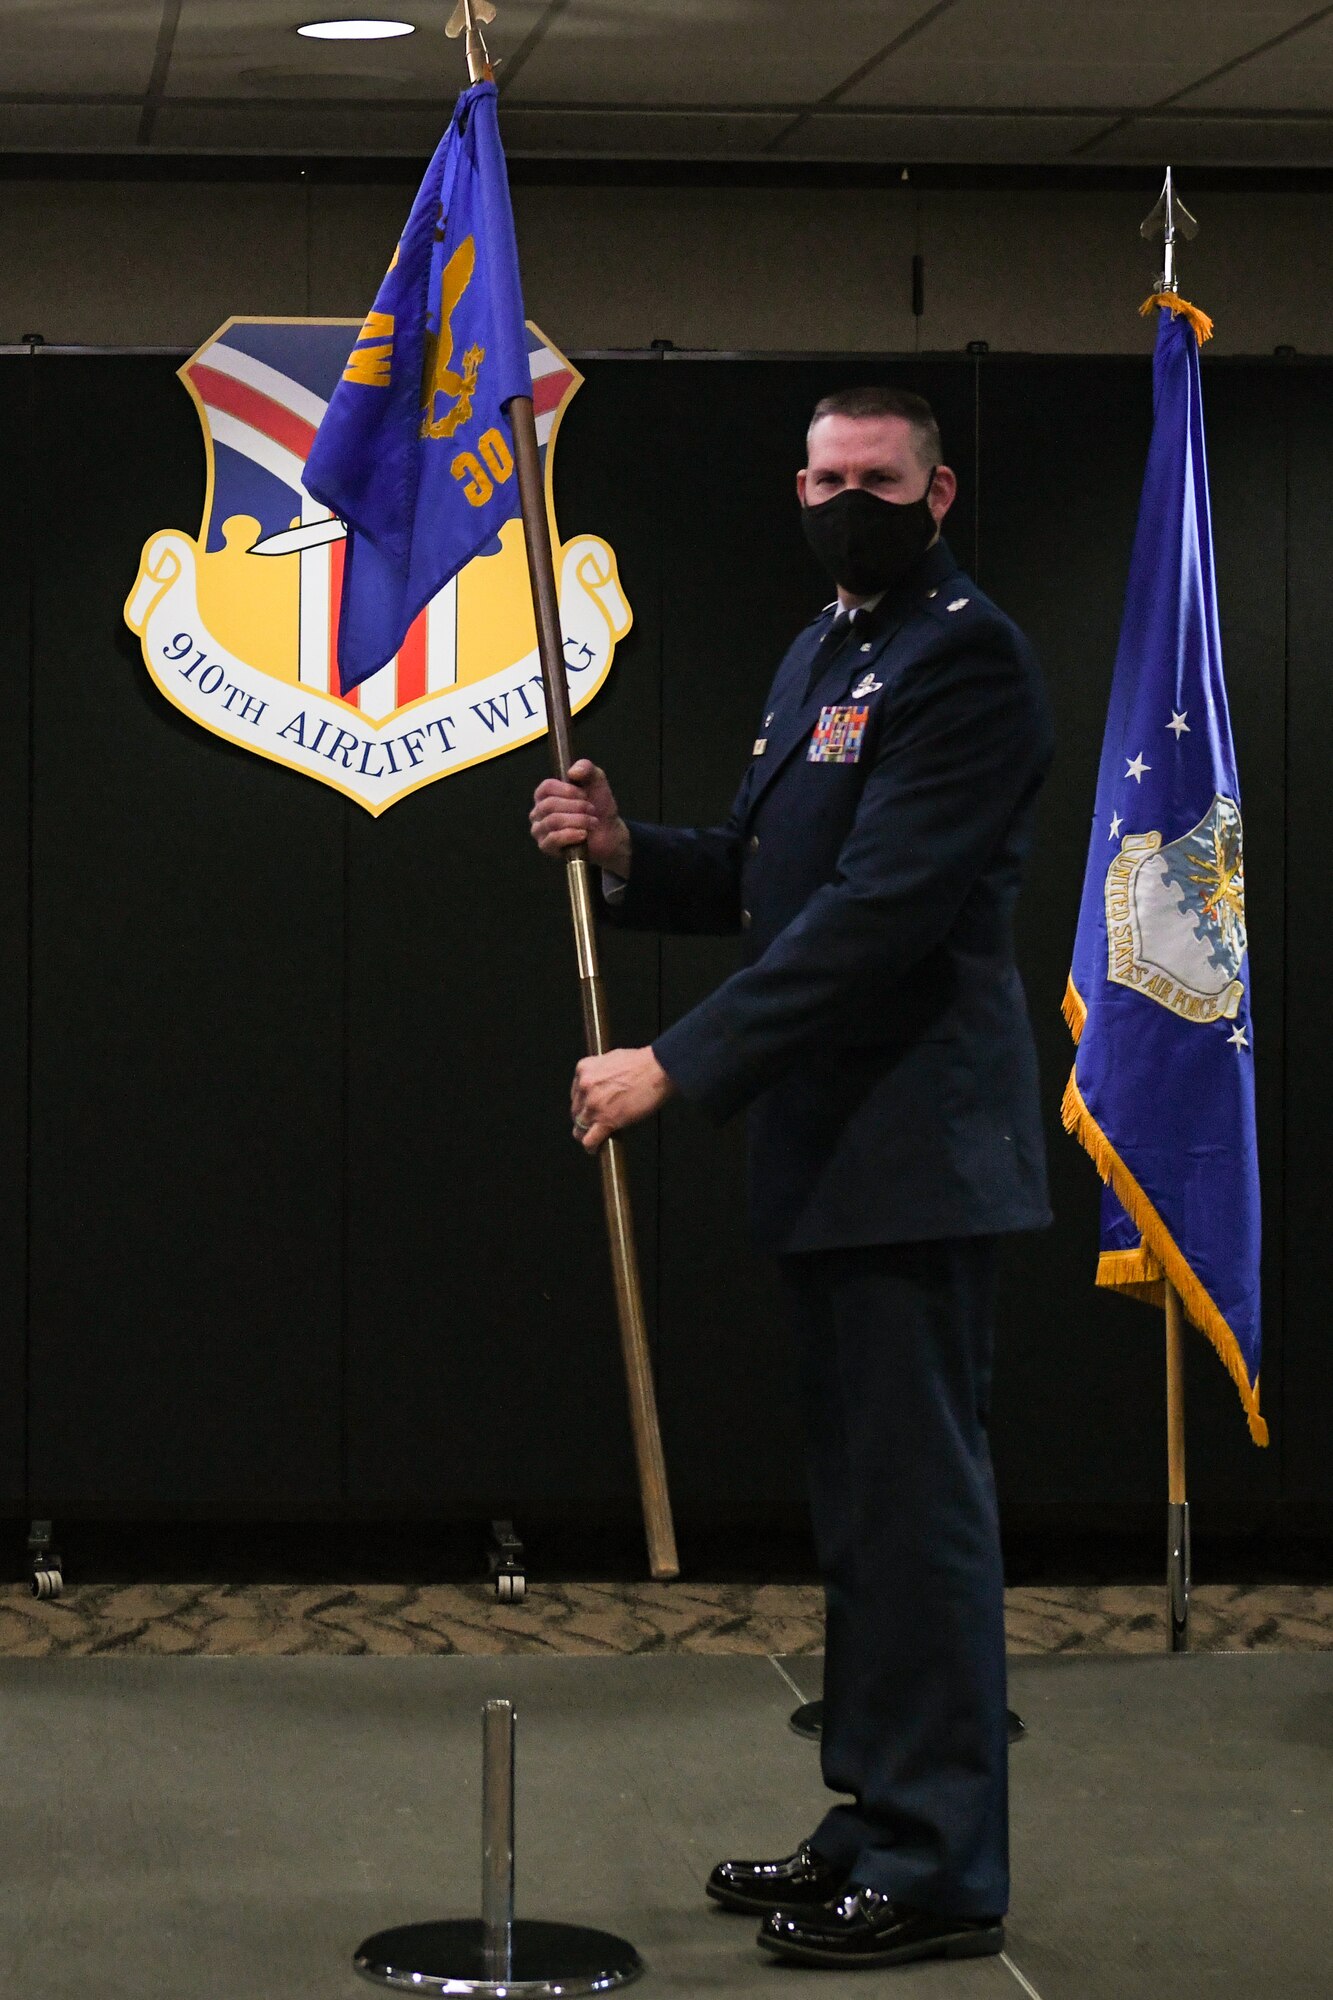 Lt. Col. Scott Lawson assumed command of the 910th Operations Group during an assumption of command ceremony held in Youngstown Air Reserve Station’s community activity center, Dec. 6, 2020.